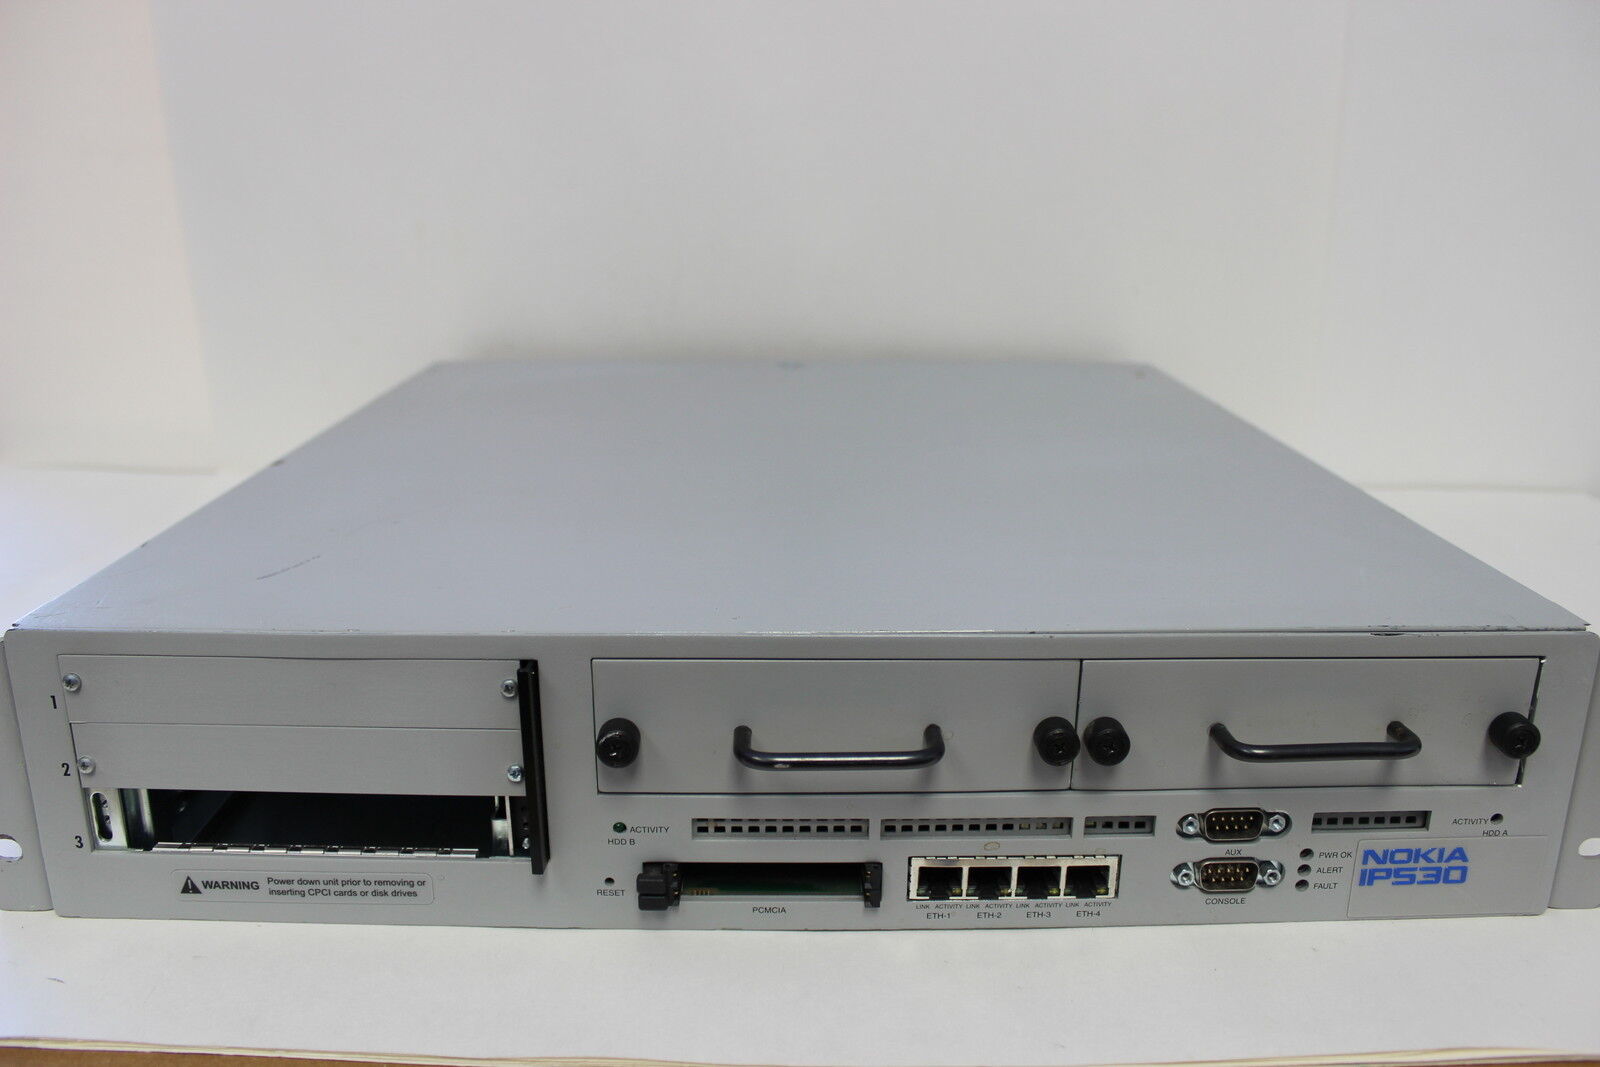 NOKIA IP530 IP0530 FIREWALL IP SECURITY SOLUTIONS WITH WARRANTY